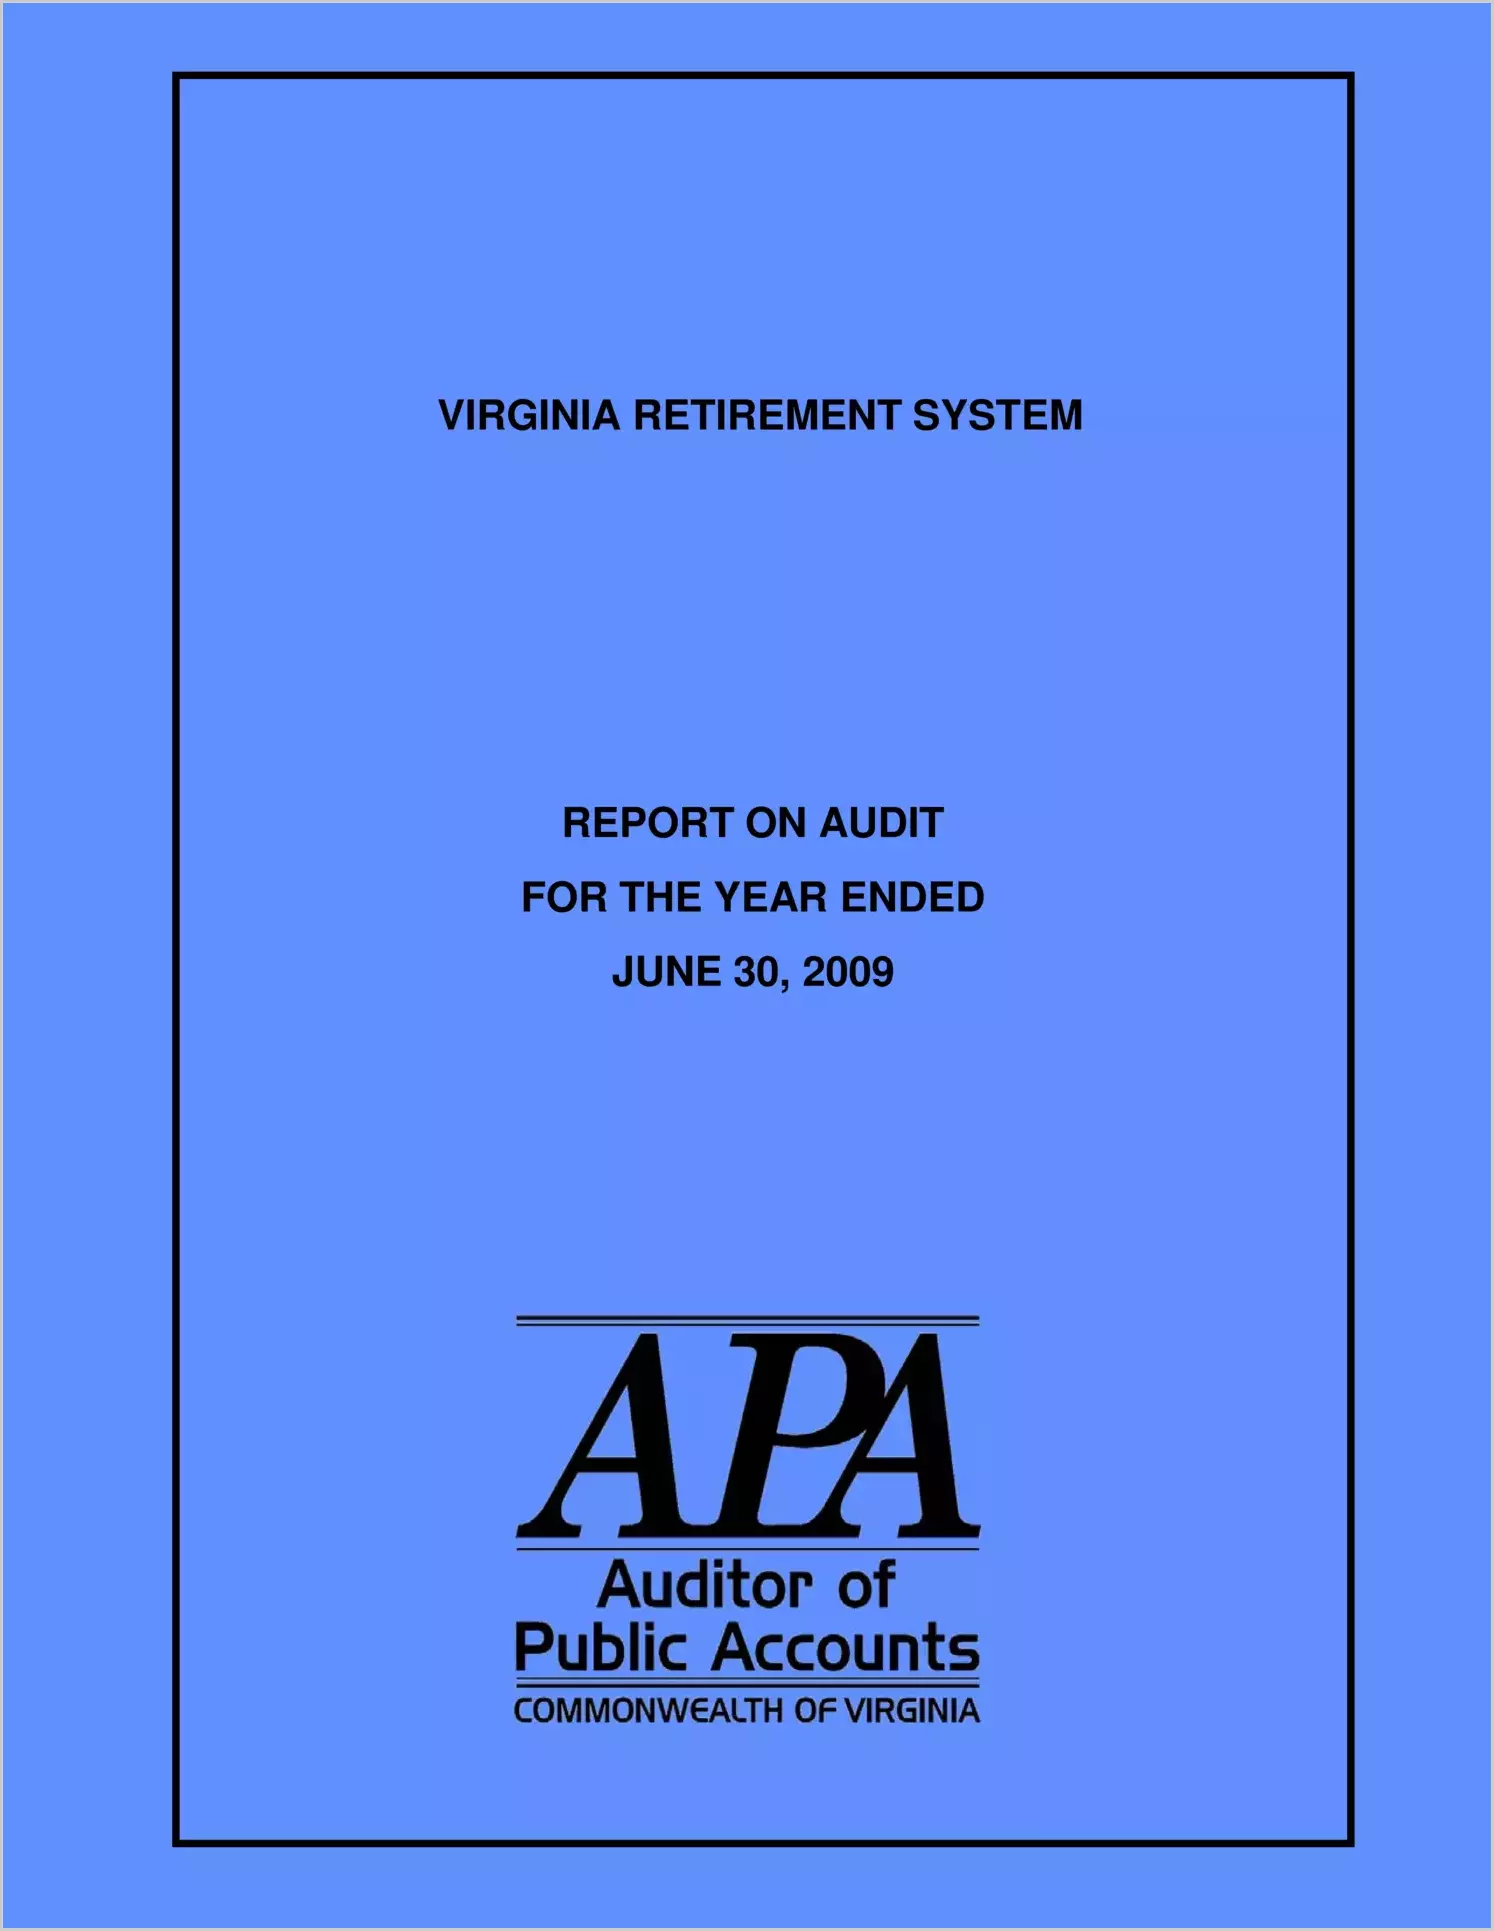 Virginia Retirement System for the year ended June 30, 2009